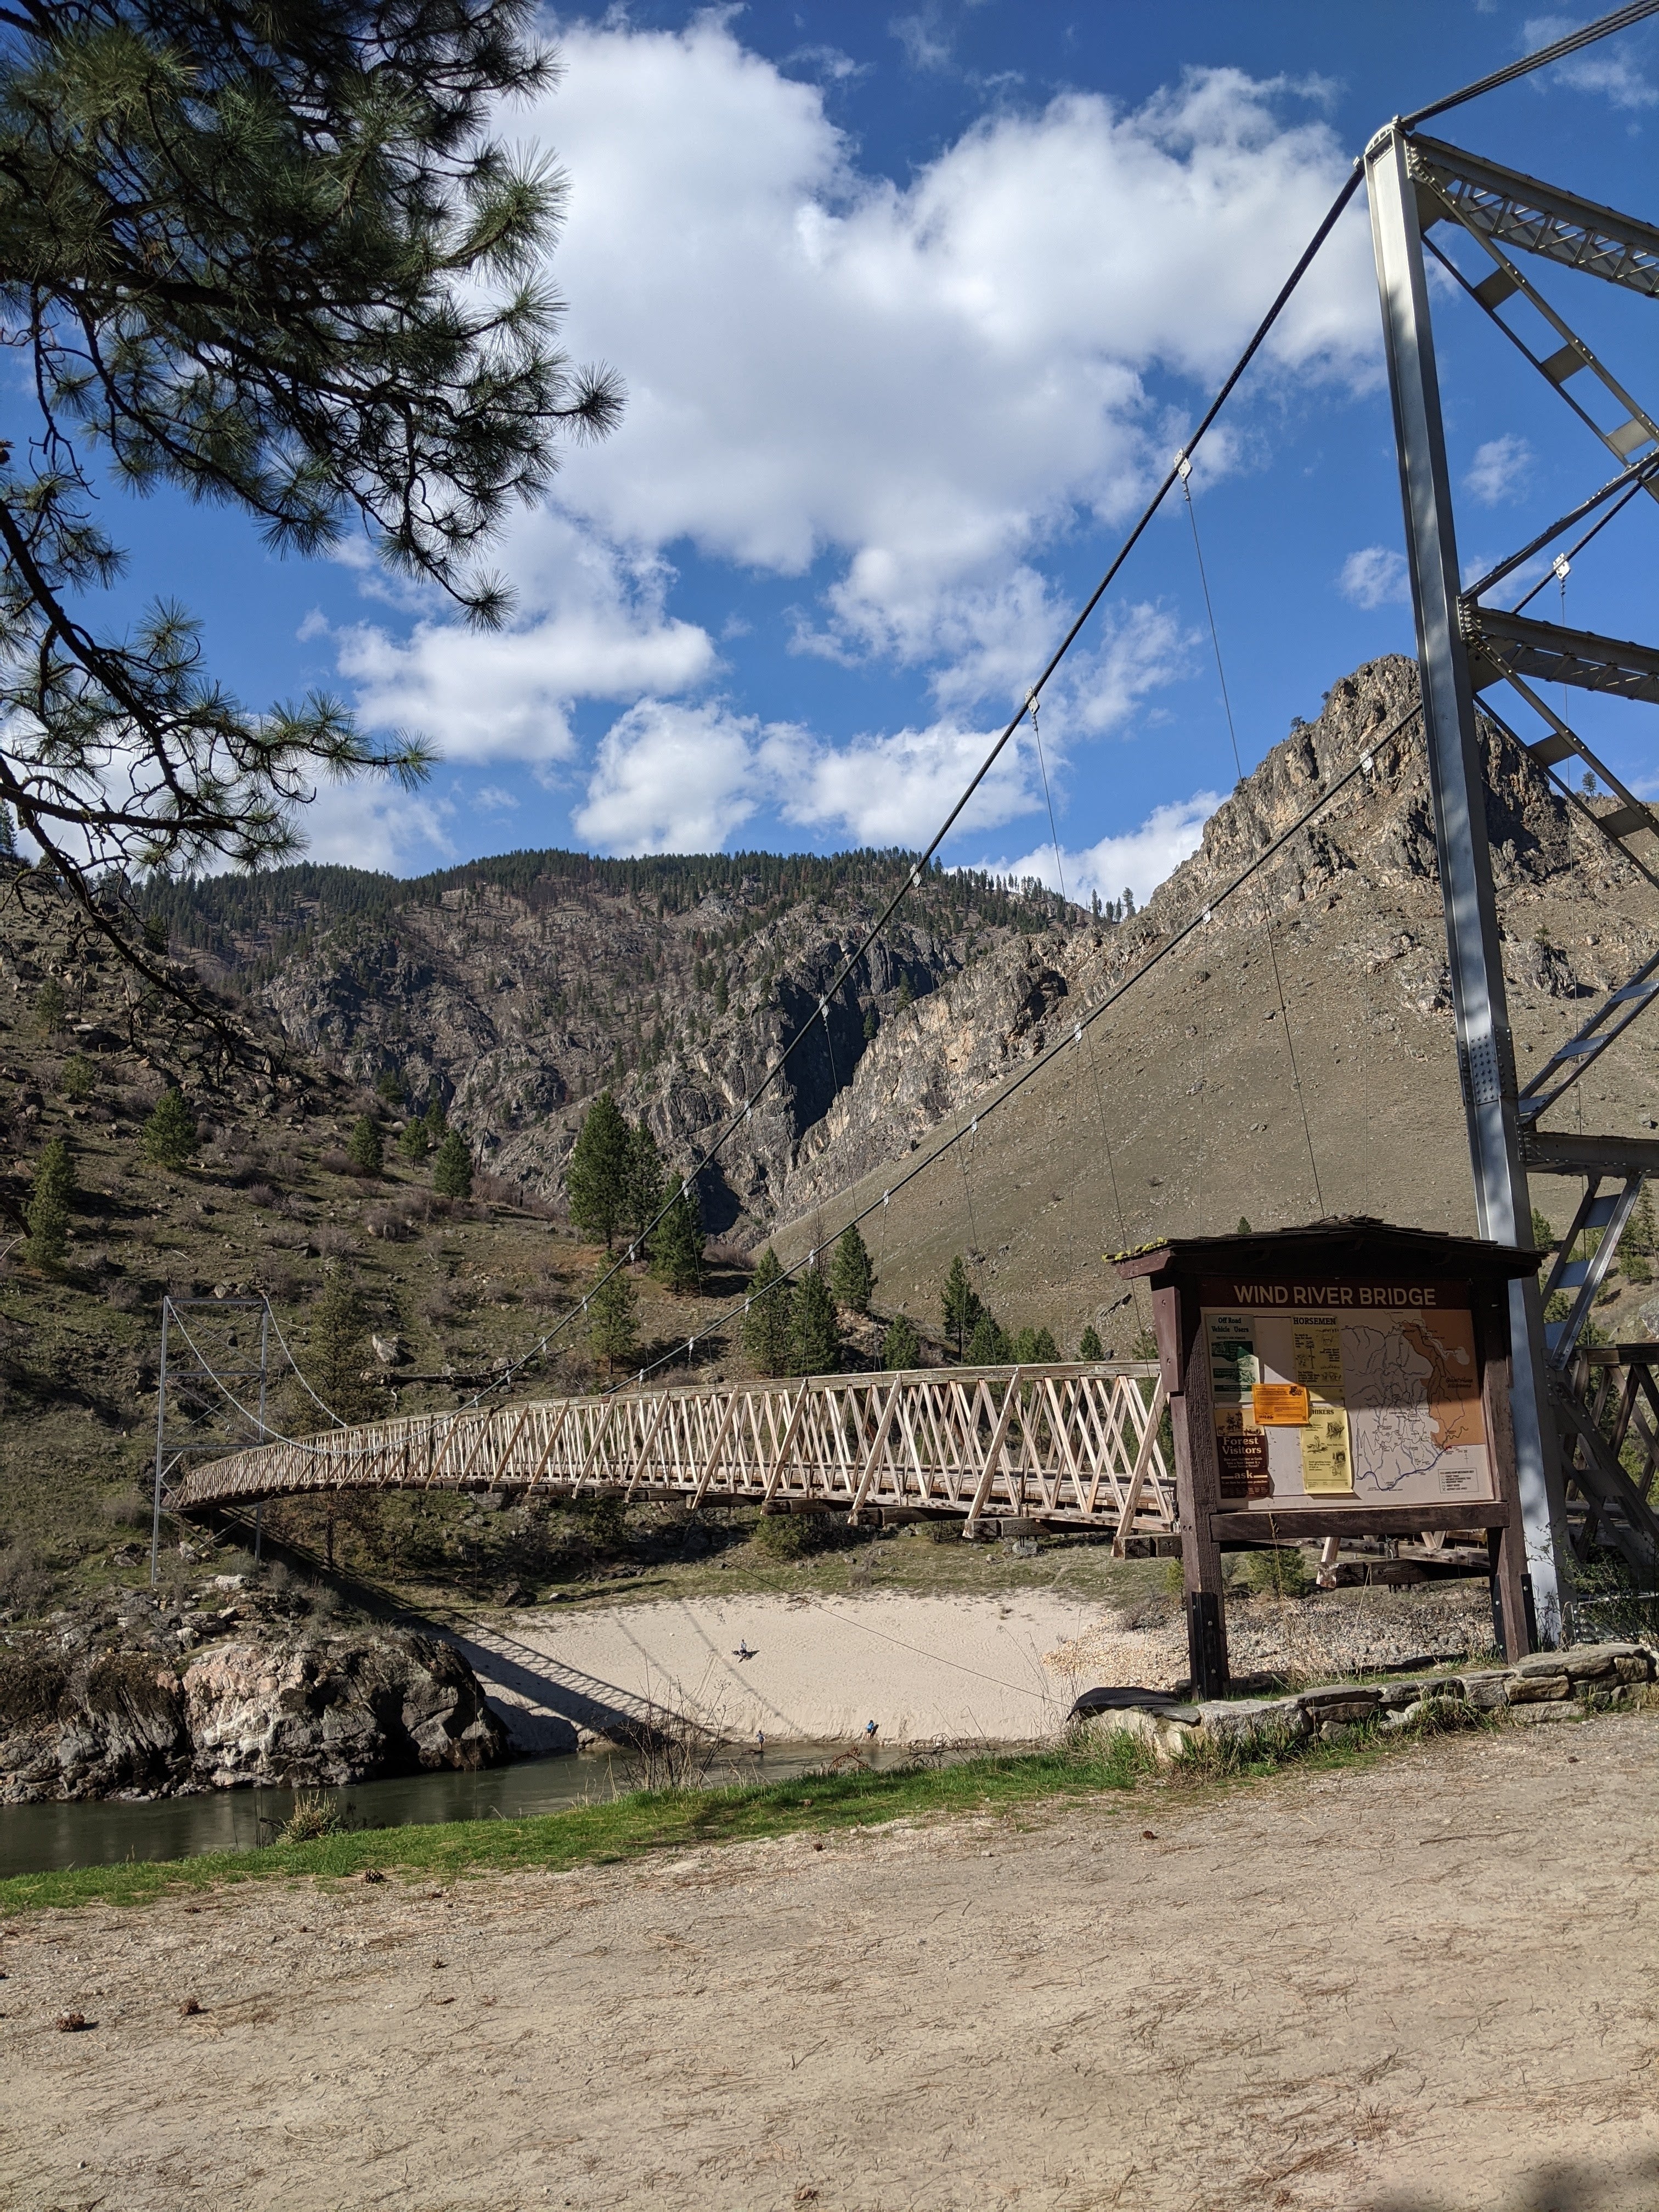 Camper submitted image from Wind River Bridge - 4